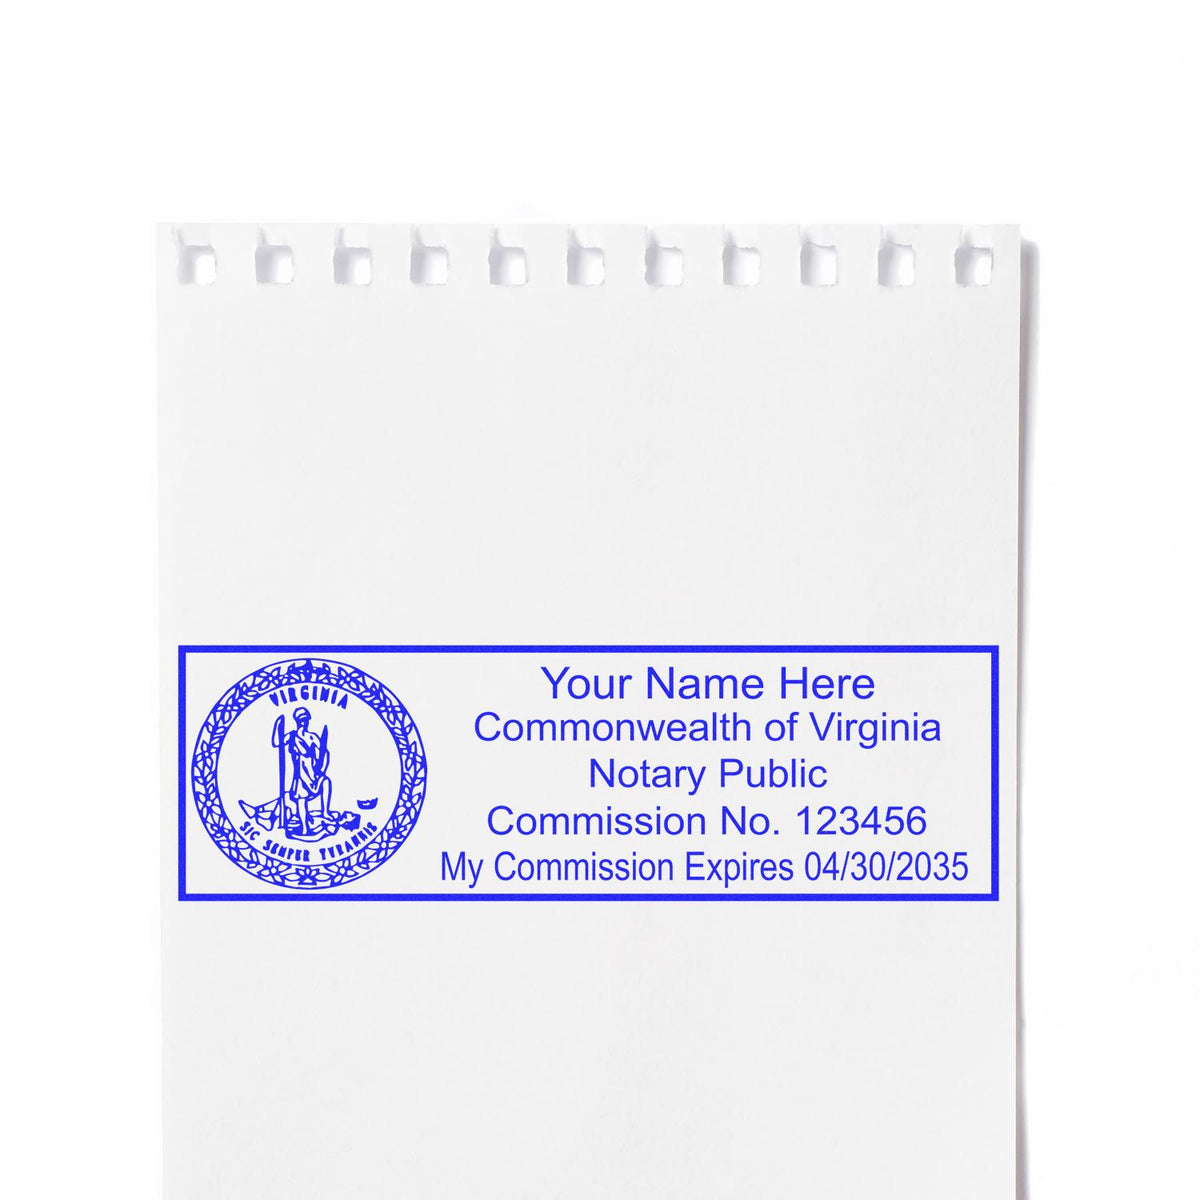 Slim Pre-Inked State Seal Notary Stamp for Virginia in use photo showing a stamped imprint of the Slim Pre-Inked State Seal Notary Stamp for Virginia